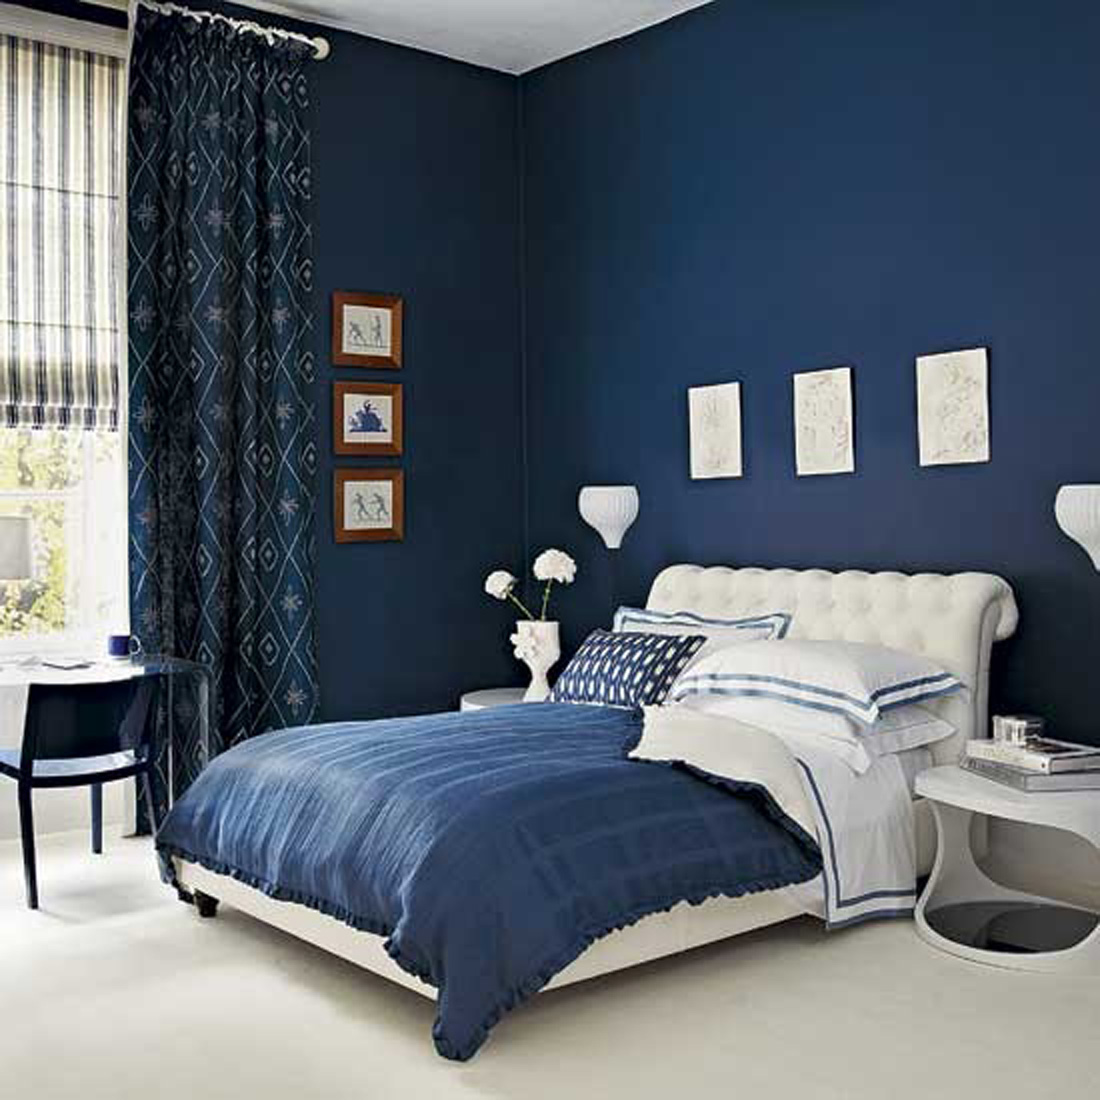 Platform Bed Window Cozy Platform Bed Feats Geometric Window Curtain And Charming Blue Bedroom With Small Bedside Table Design Bedroom 10 Fresh Blue Bedroom Ideas With Fantastic Color Schemes